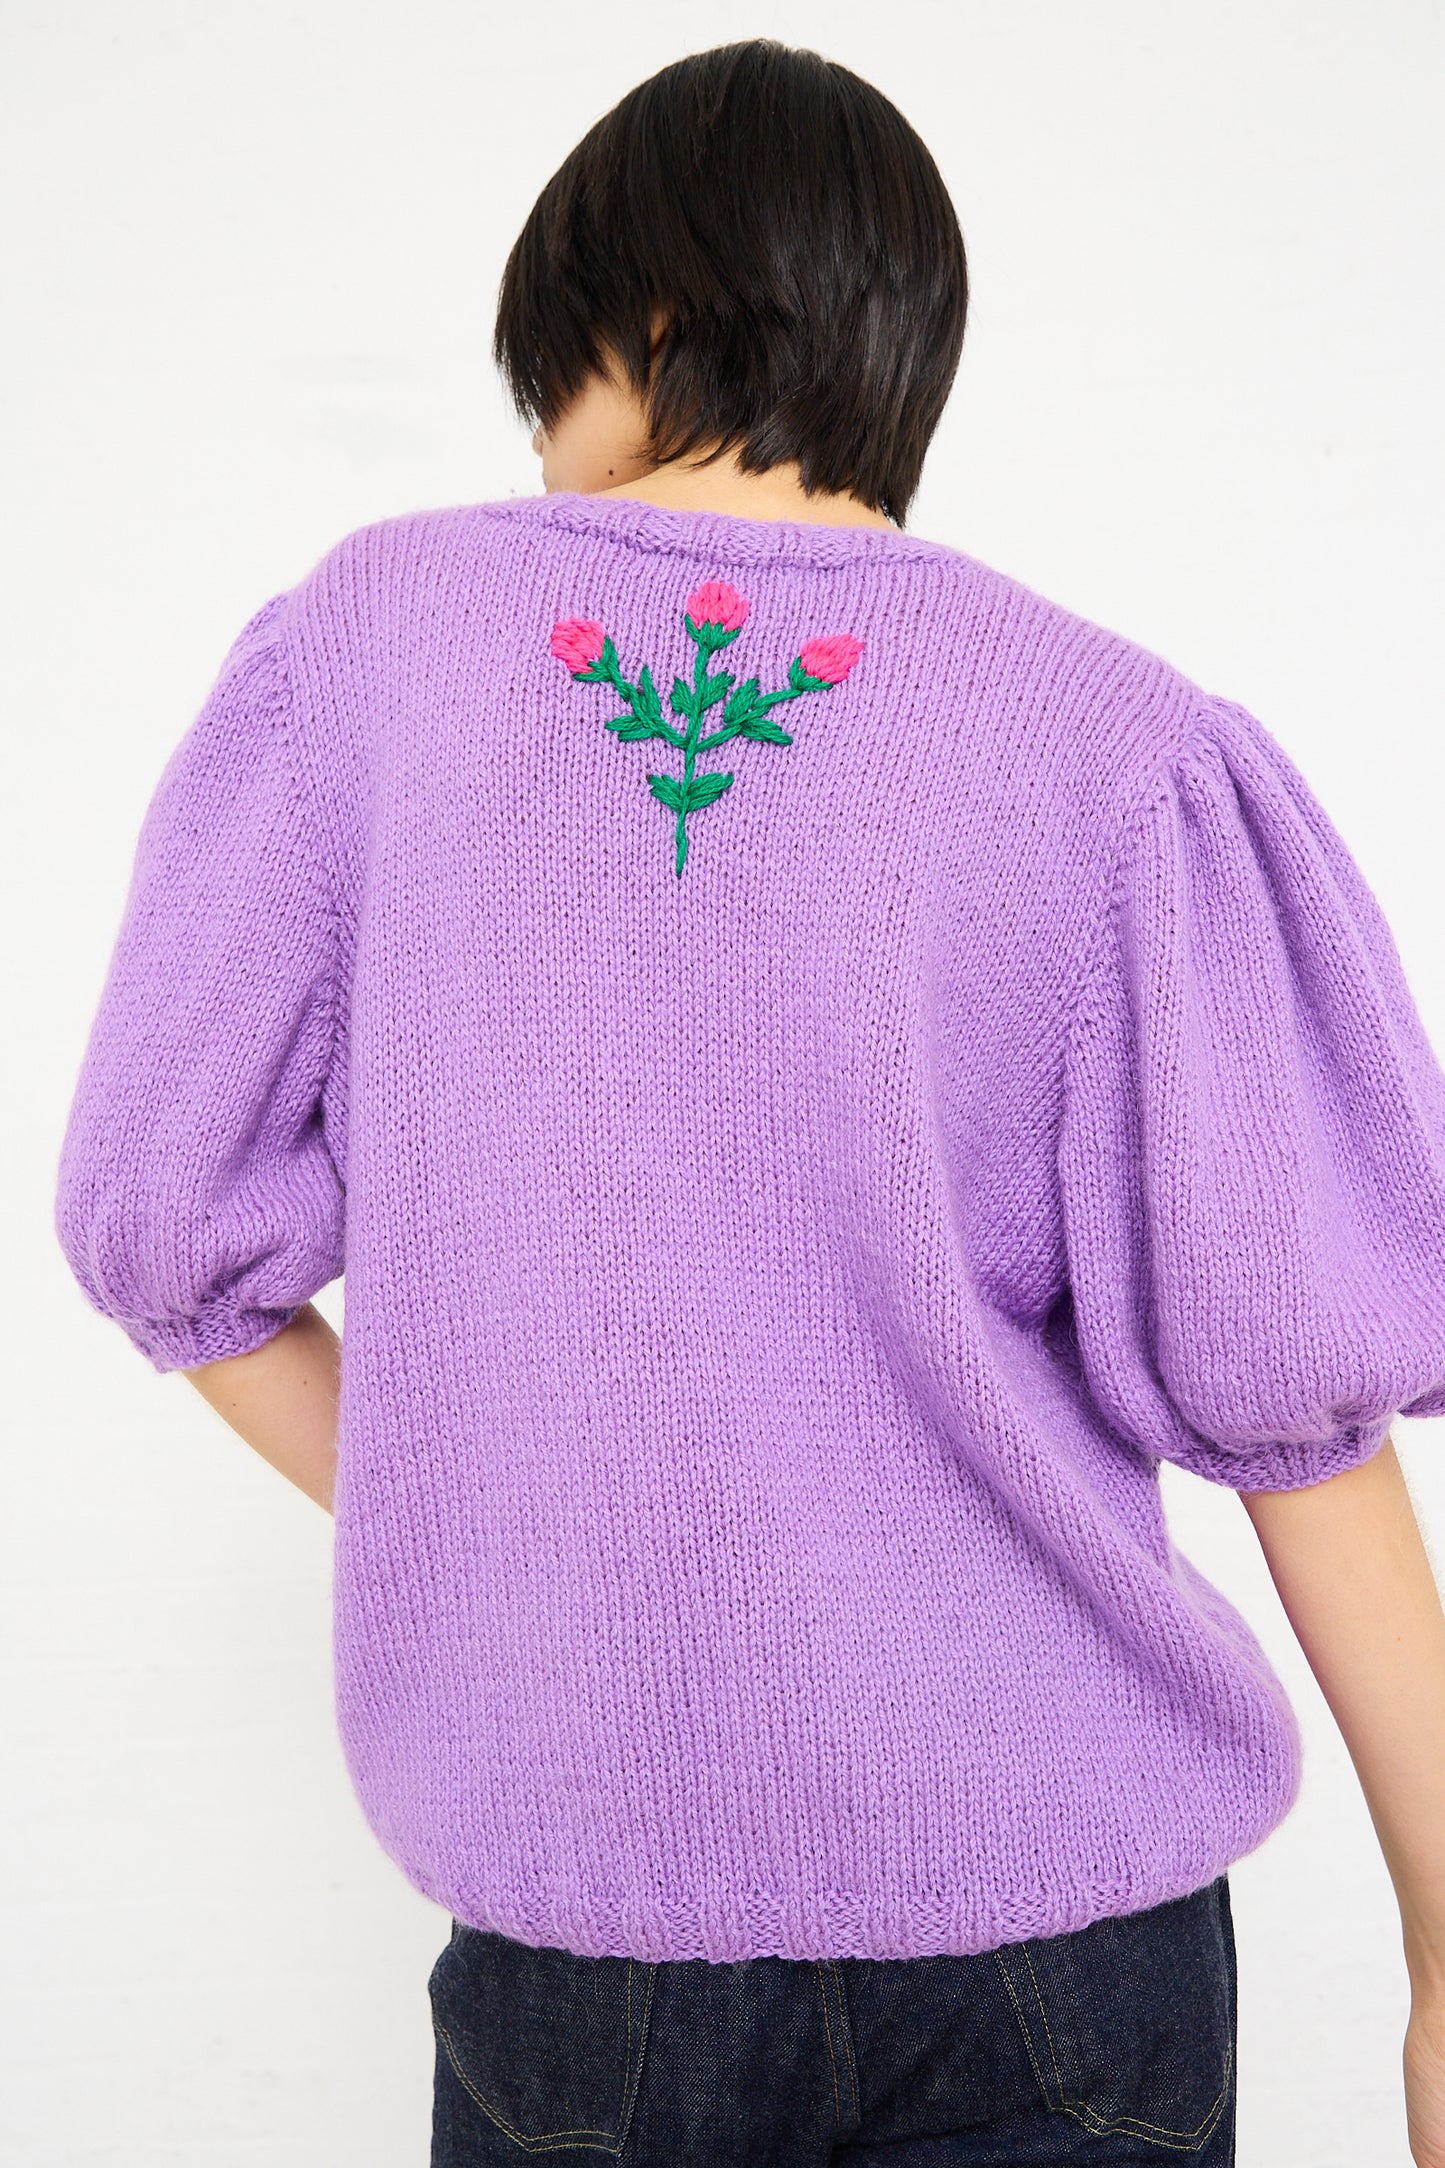 Rear view of a woman wearing a Sofio Gongli Swans Sweater in Purple with floral embroidery on the back, standing against a white background.